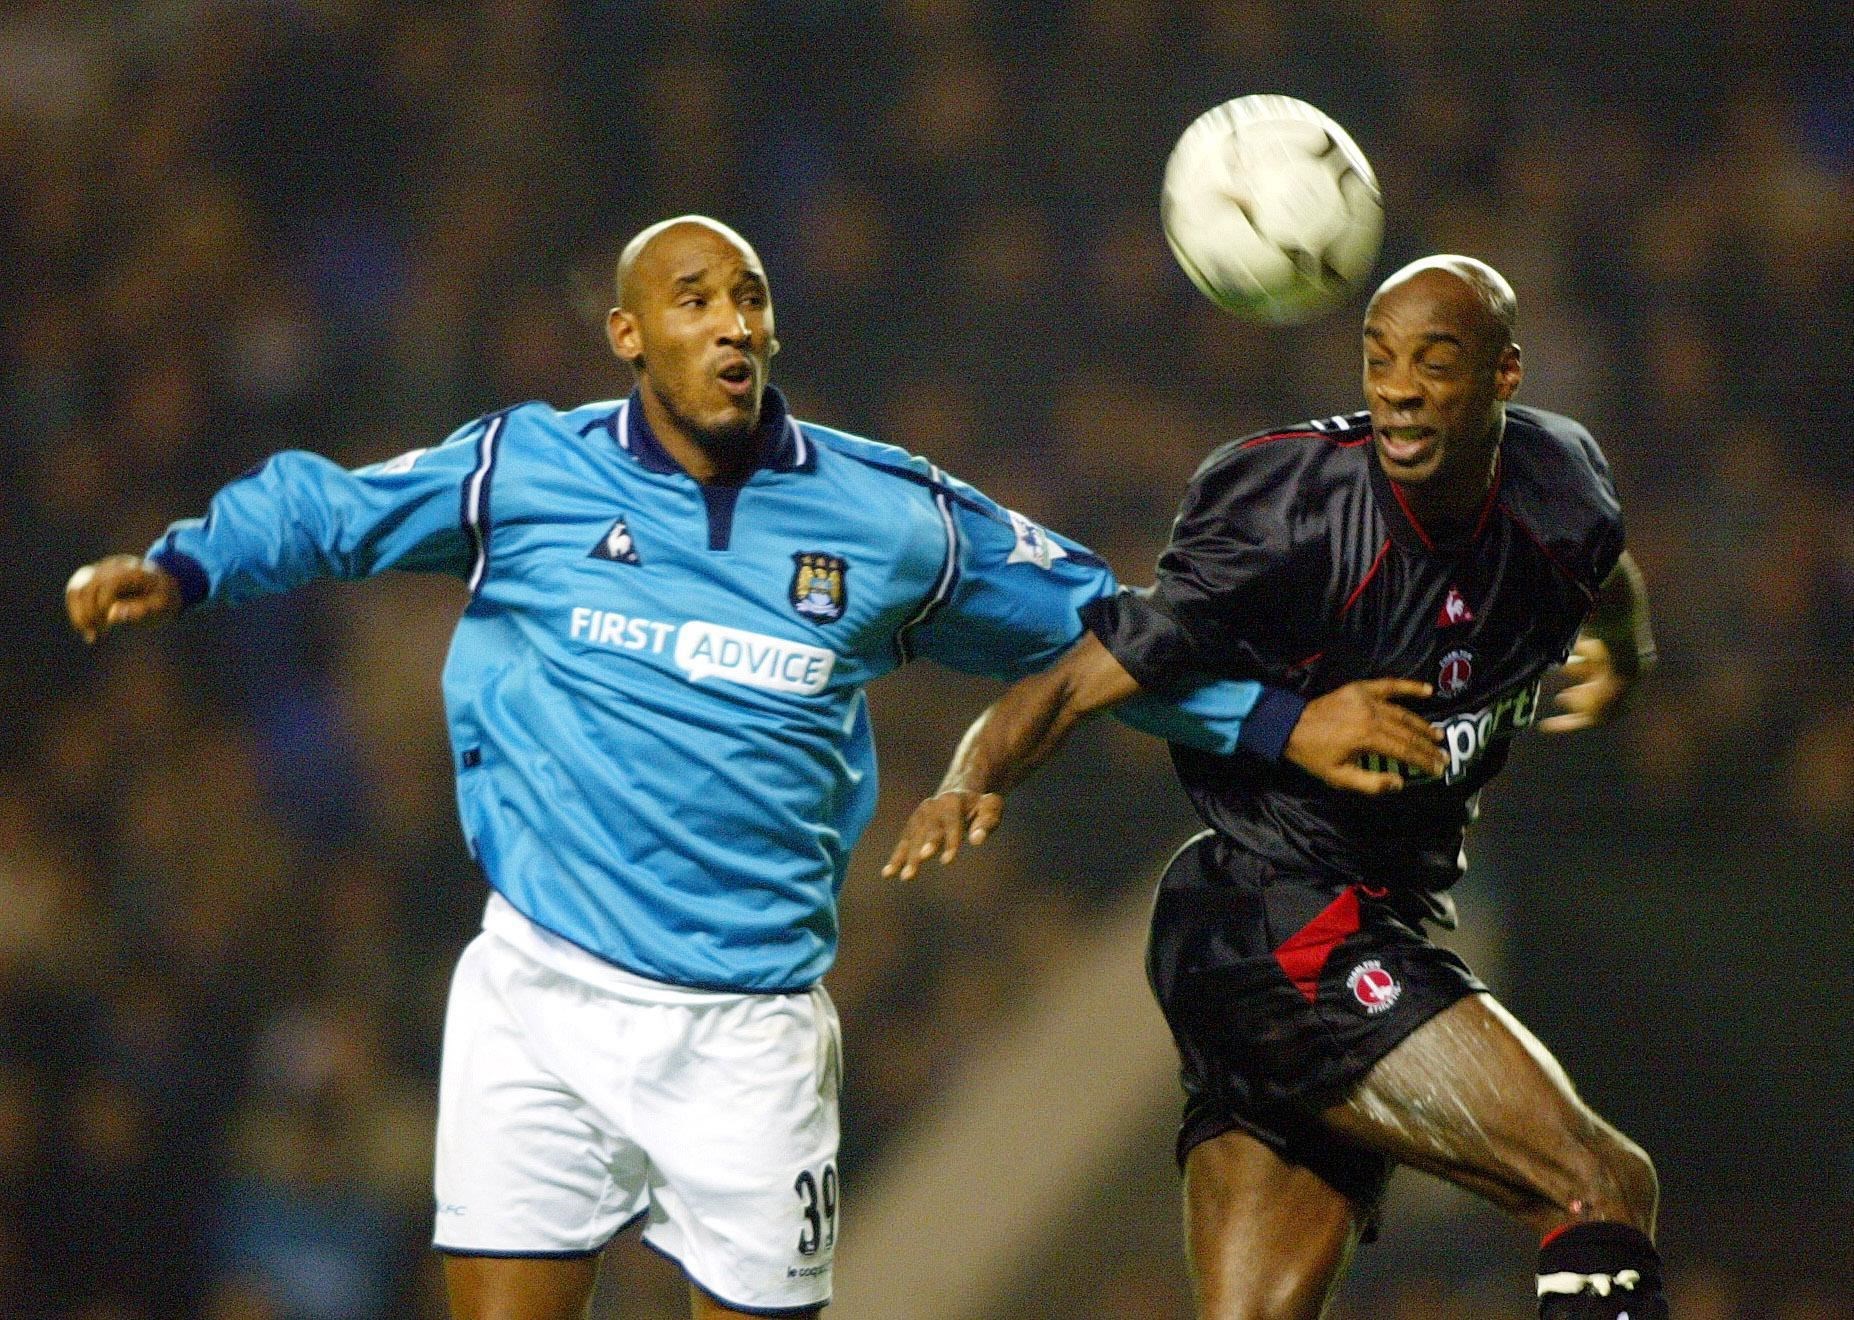 Rufus, right, beats Manchester City’s Nicolas Anelka to a header (PA)